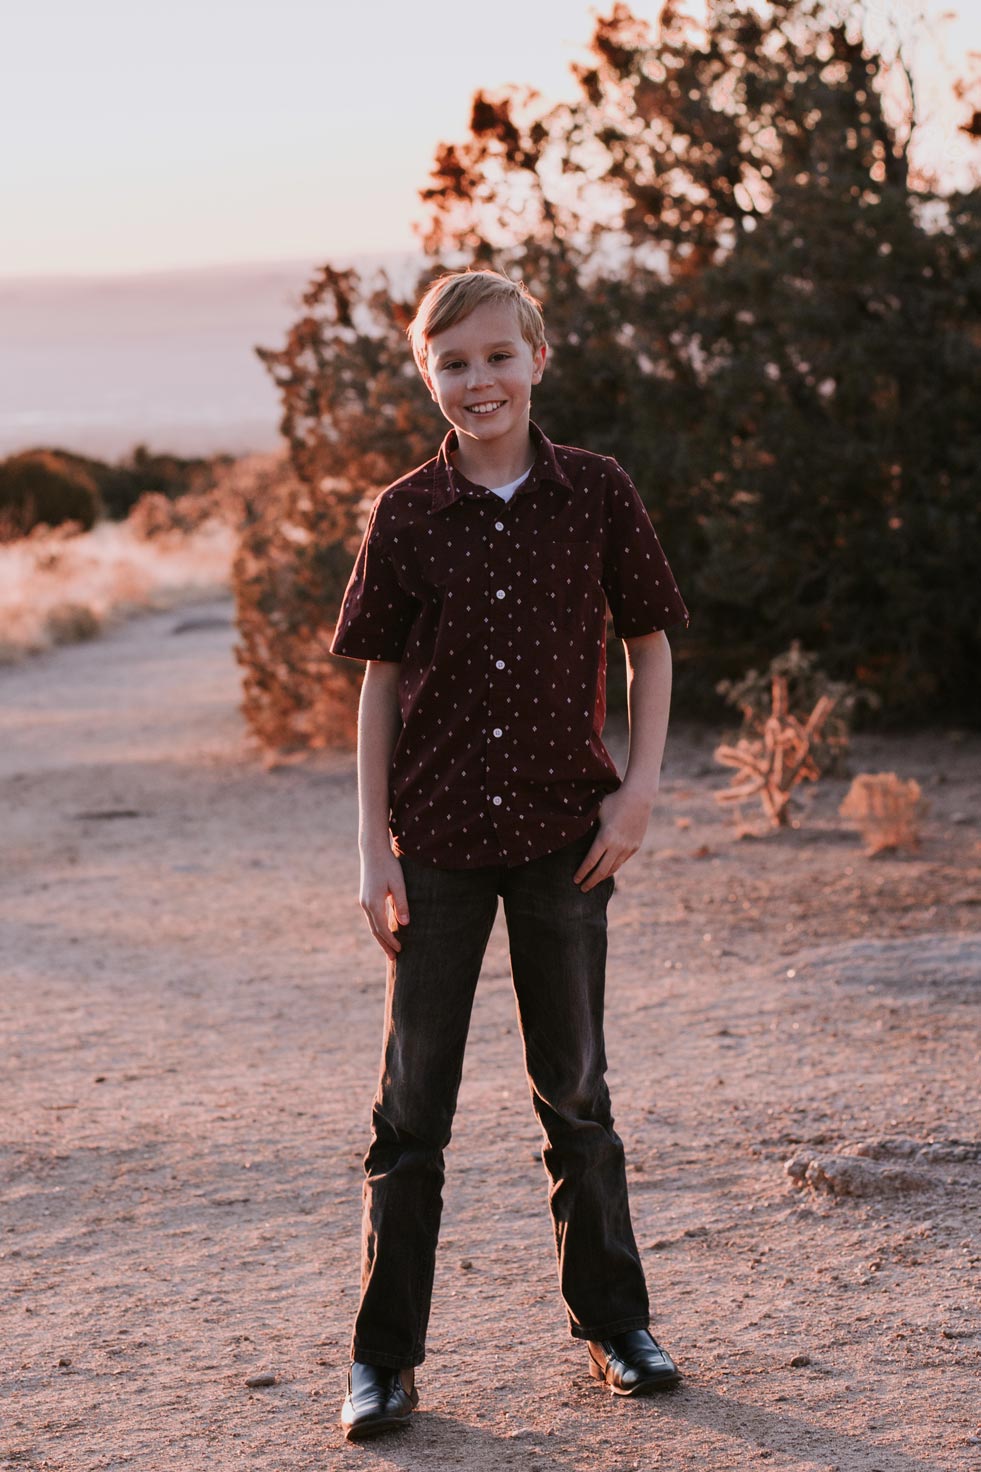 Smiling boy in front of sunset in Albuquerque, NM